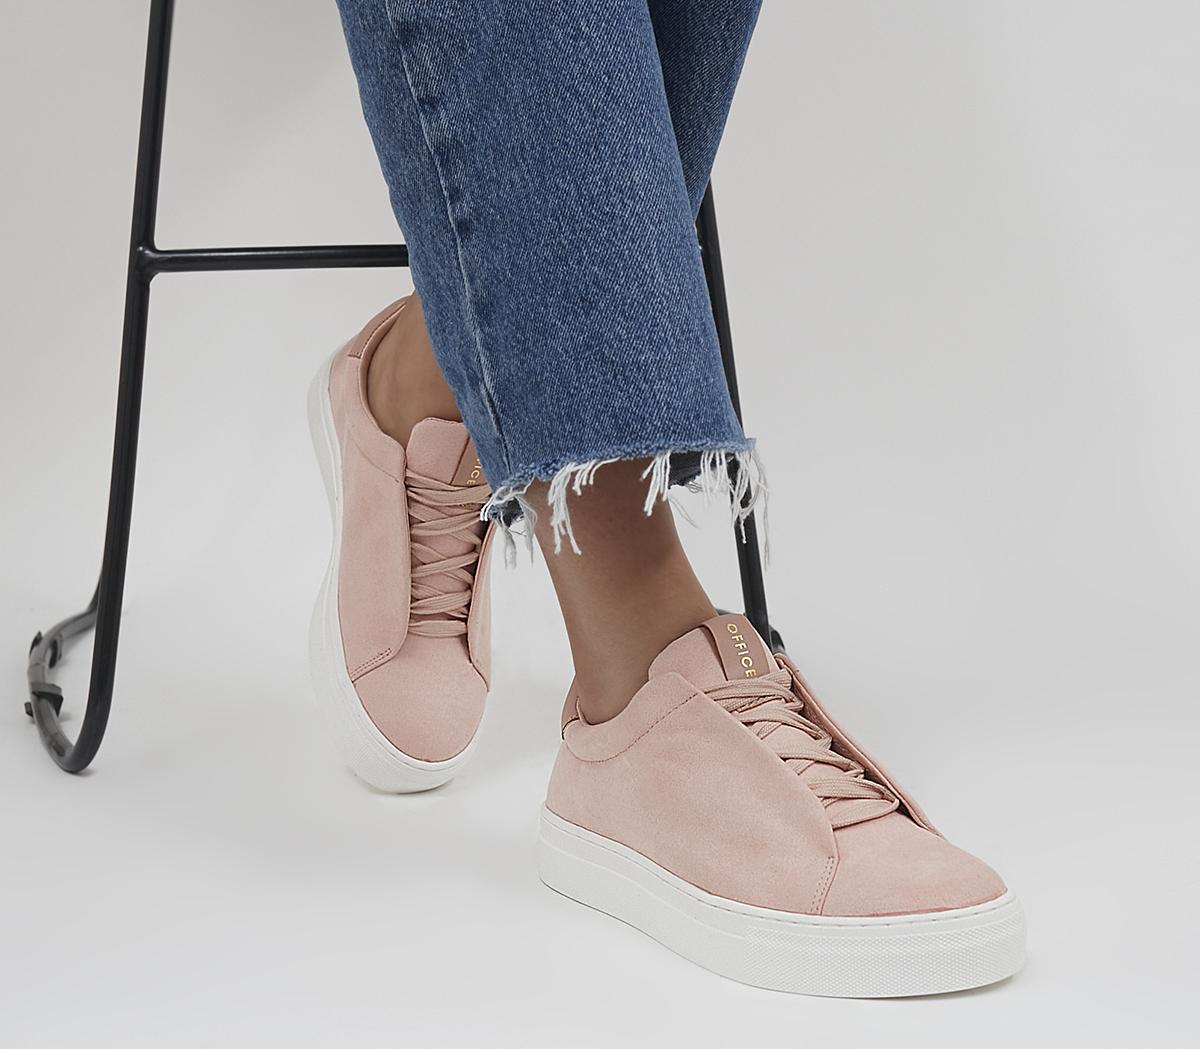 OfficeFilm Lace Up Flatform TrainersPink Micro